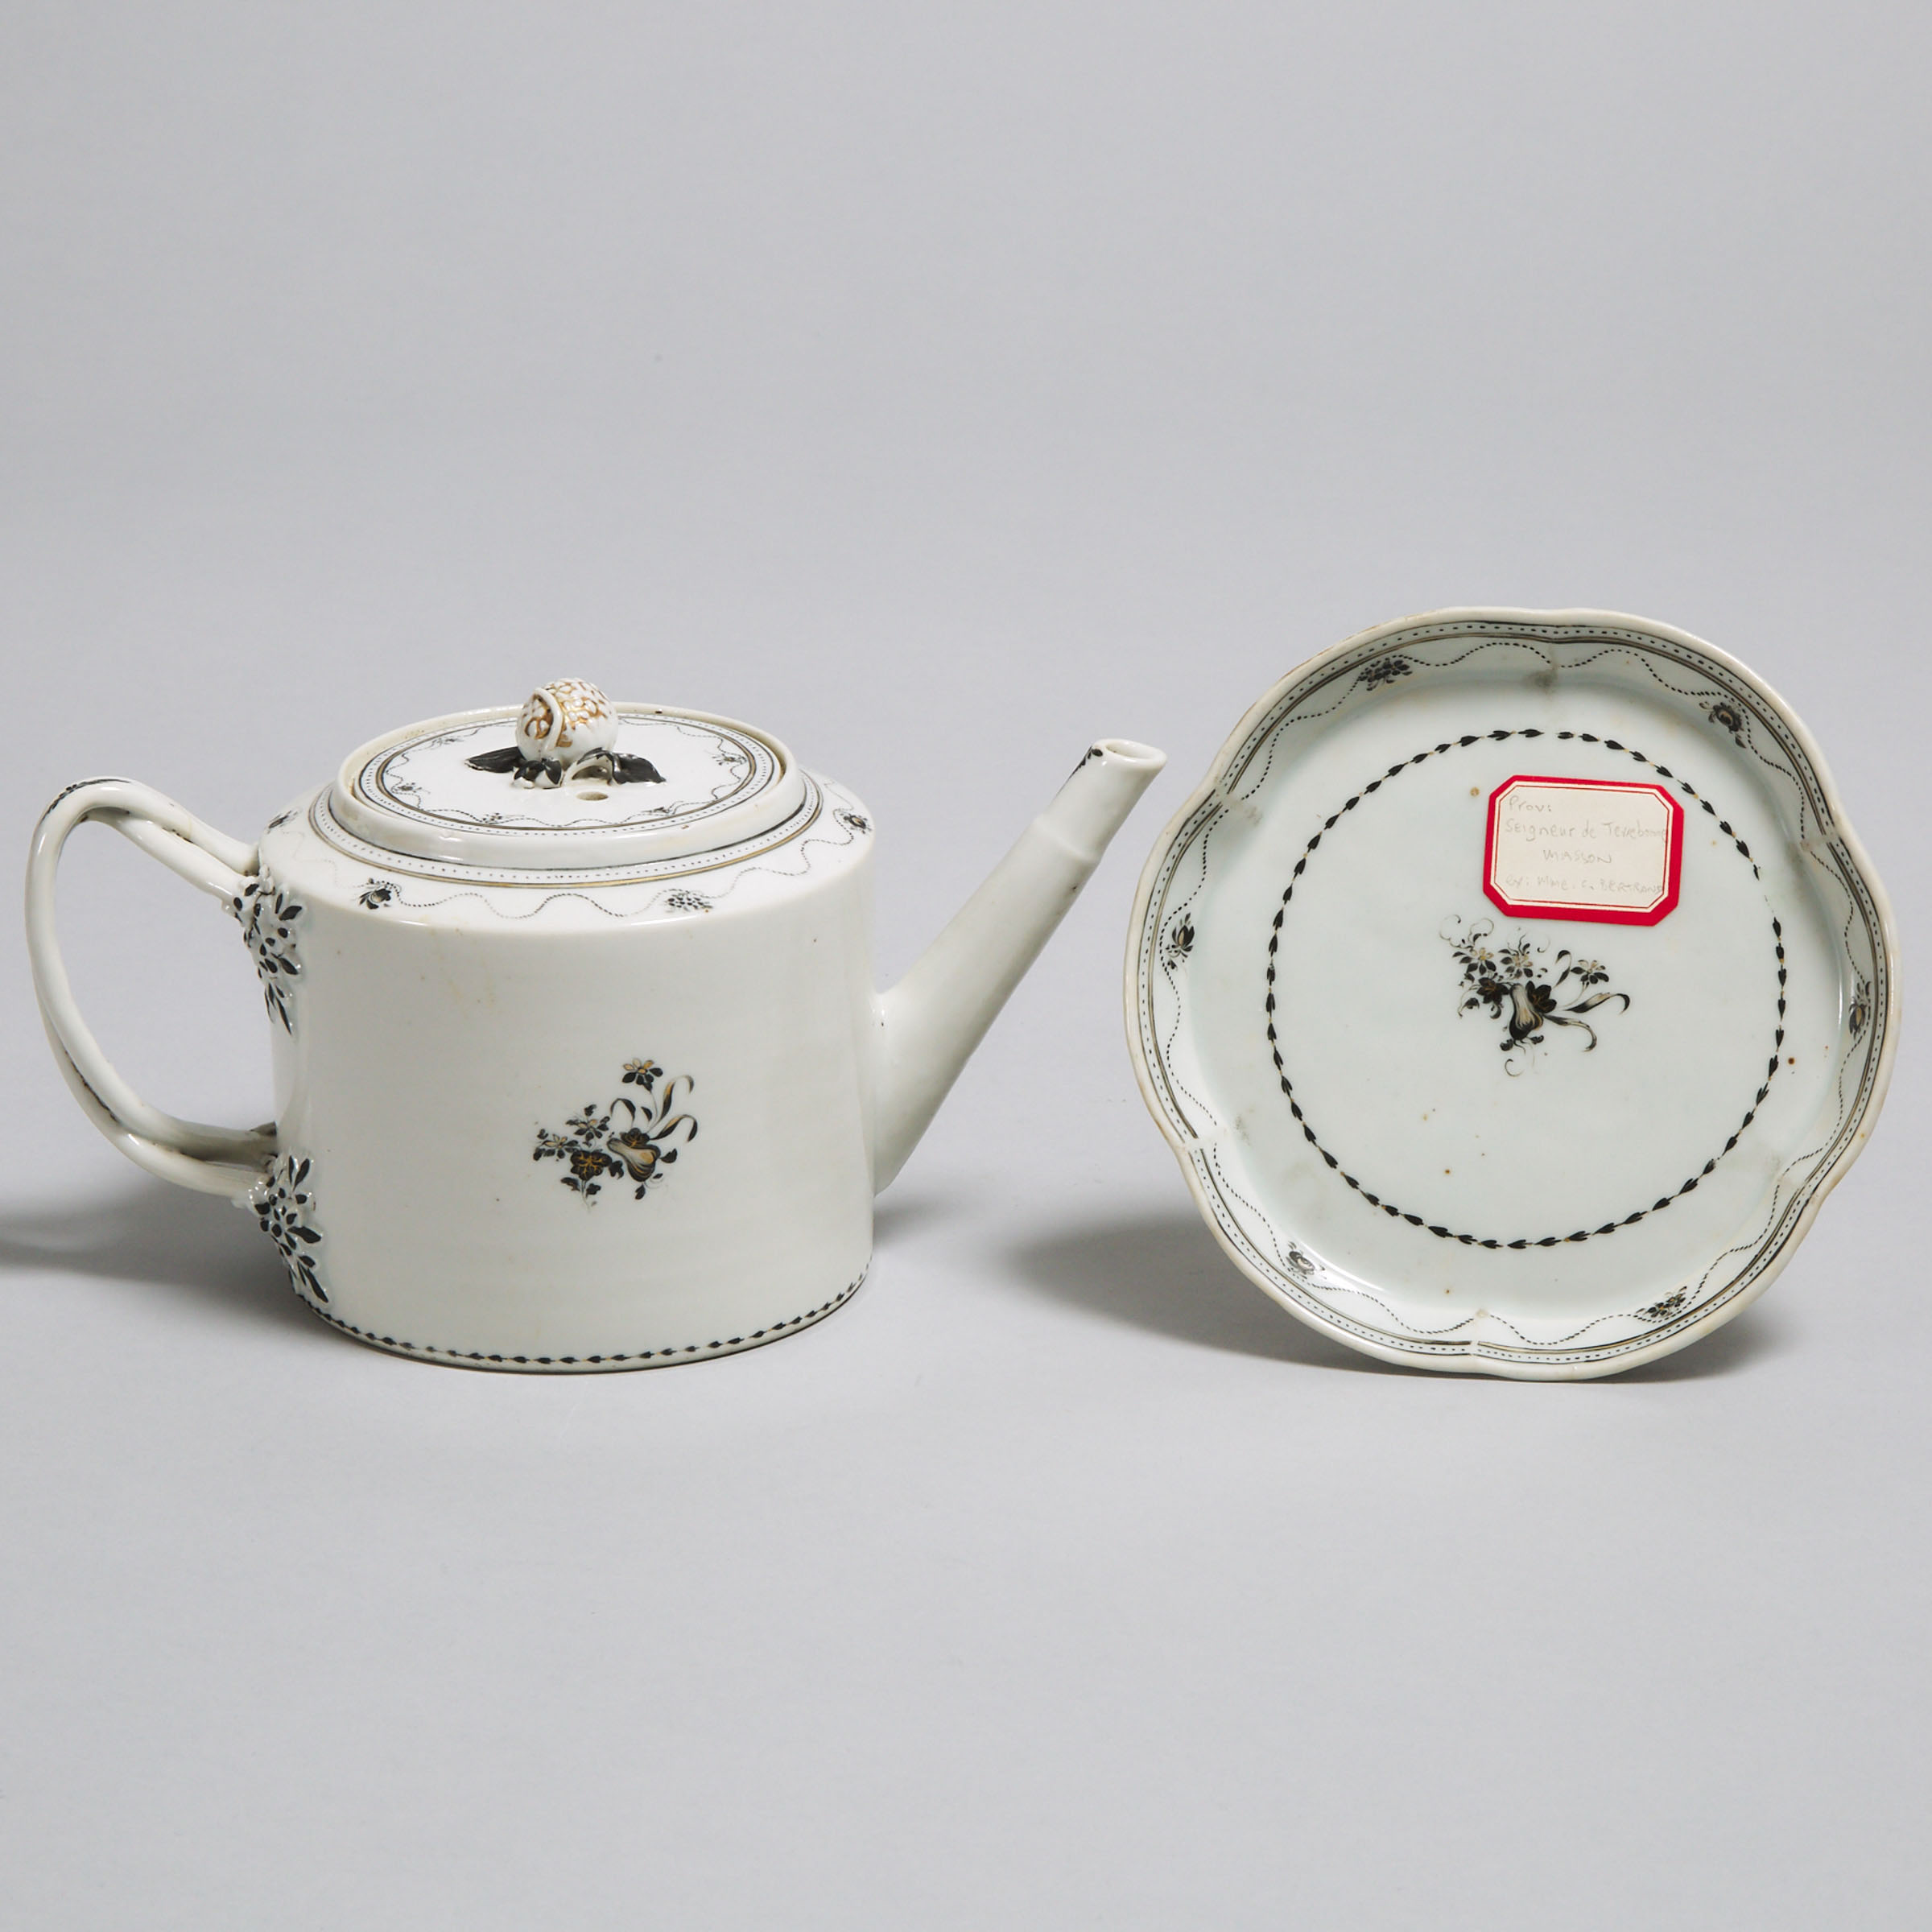 Chinese Export Teapot with Stand, c.1780